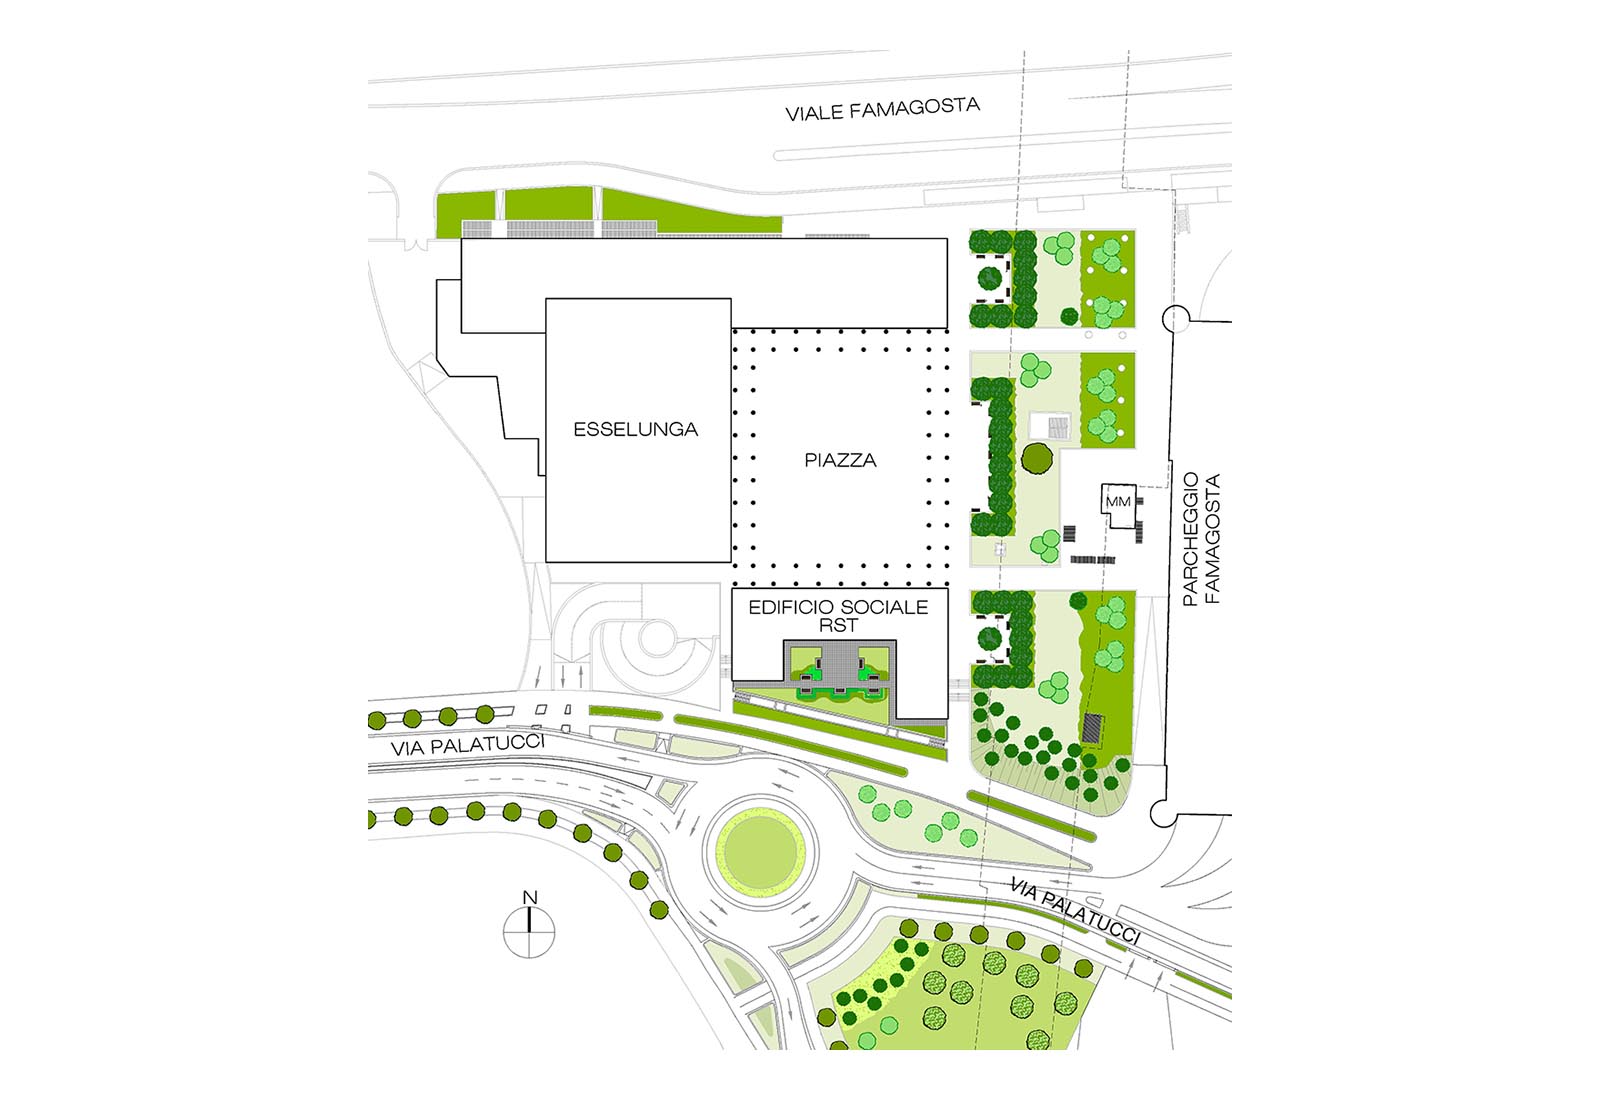 Temporary social house in the Famagosta area in Milan - Site plan